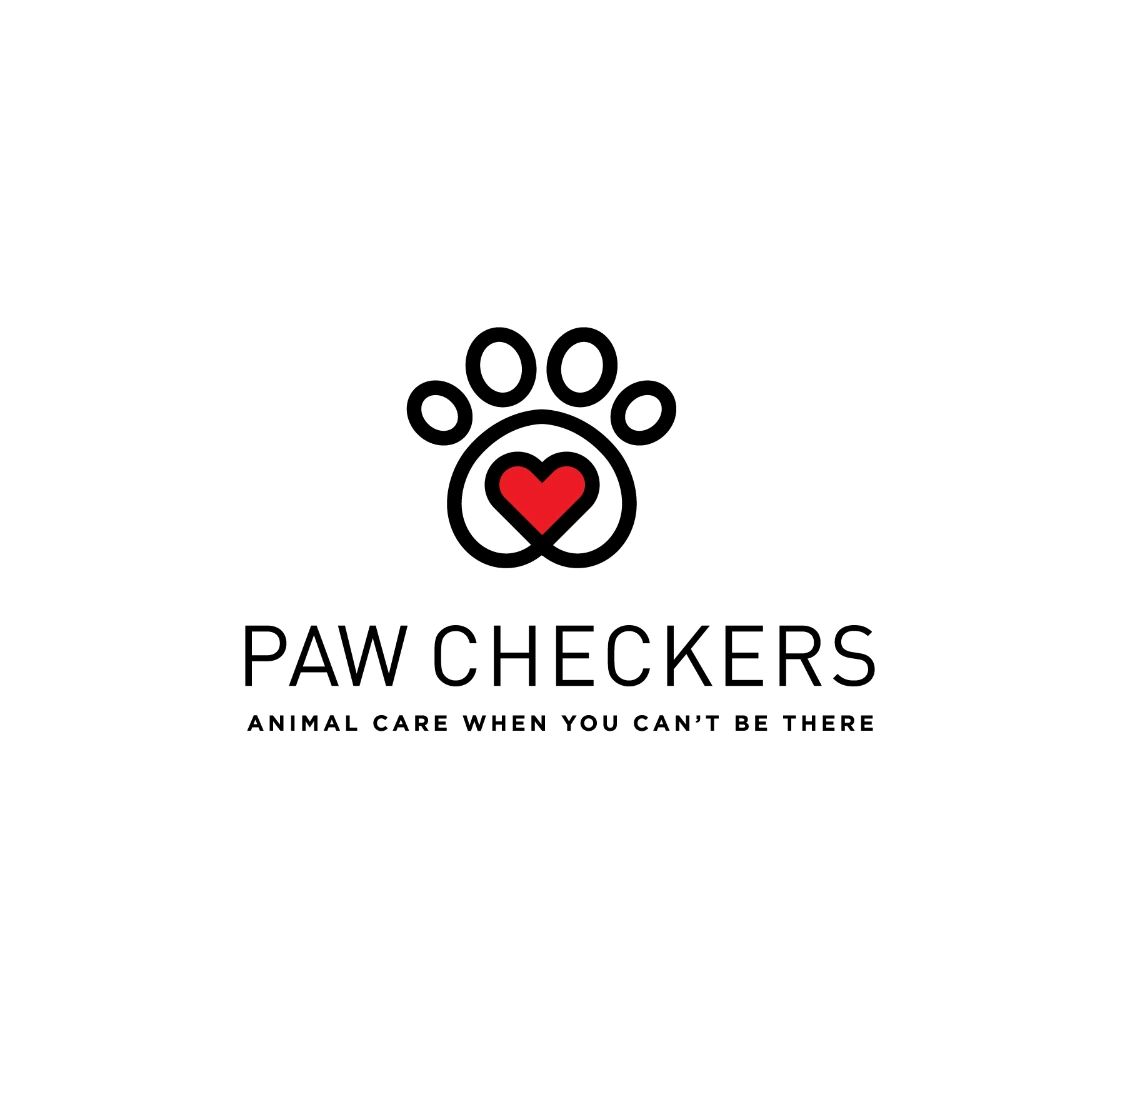 Checkers – The Paws